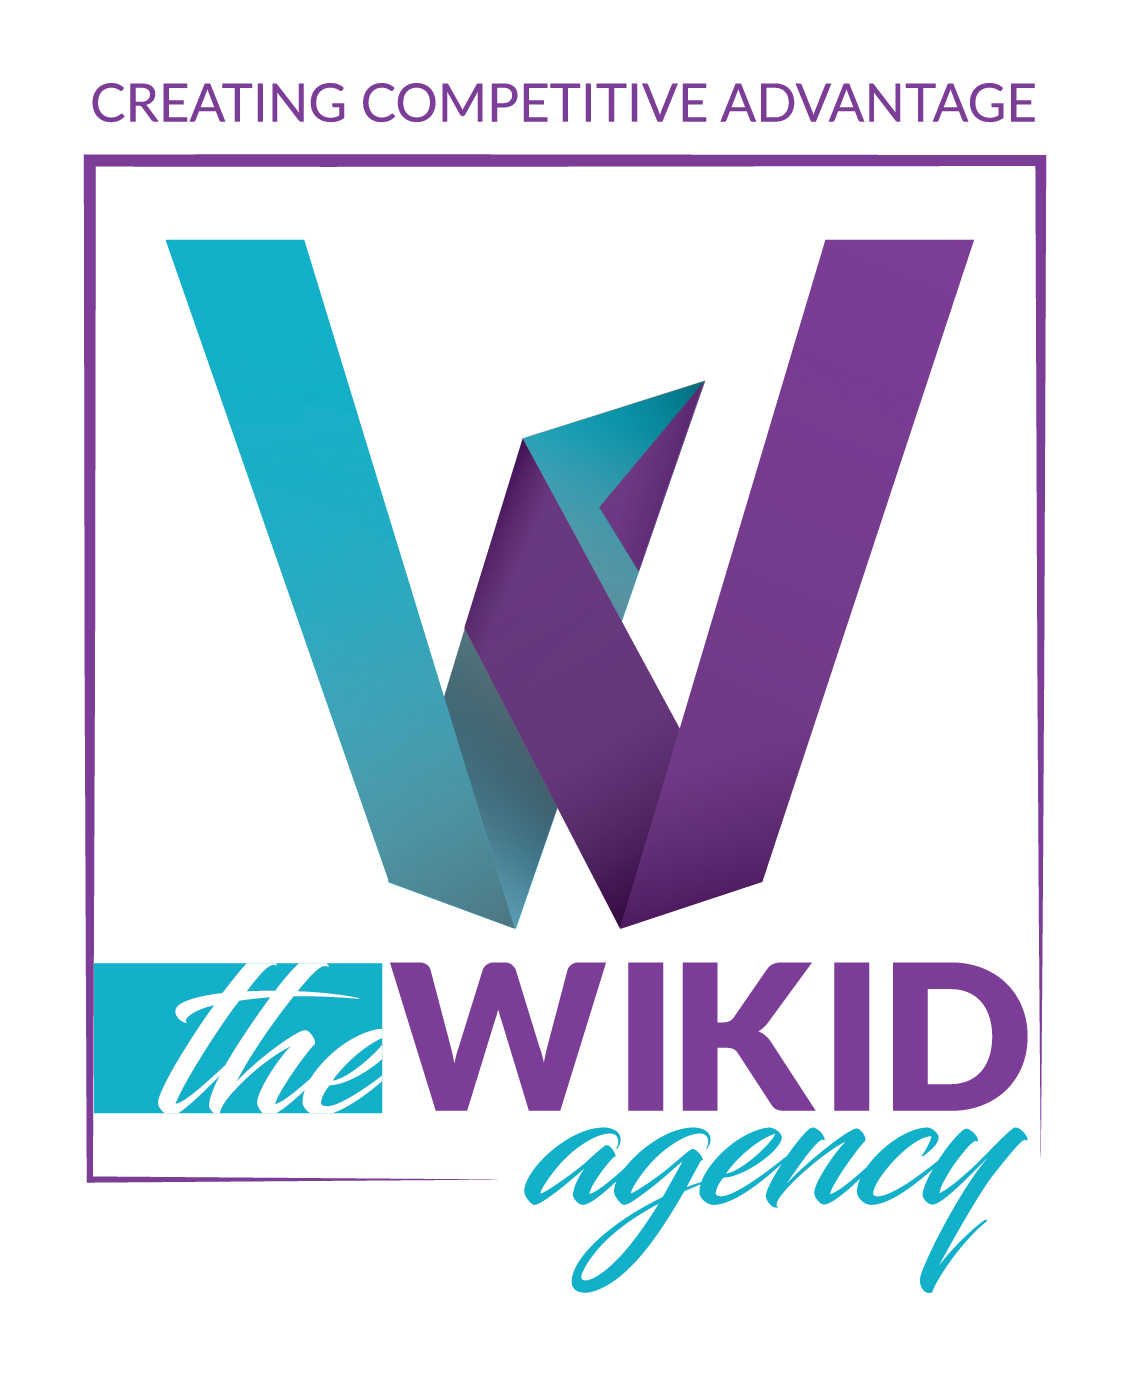 The Wikid Agency